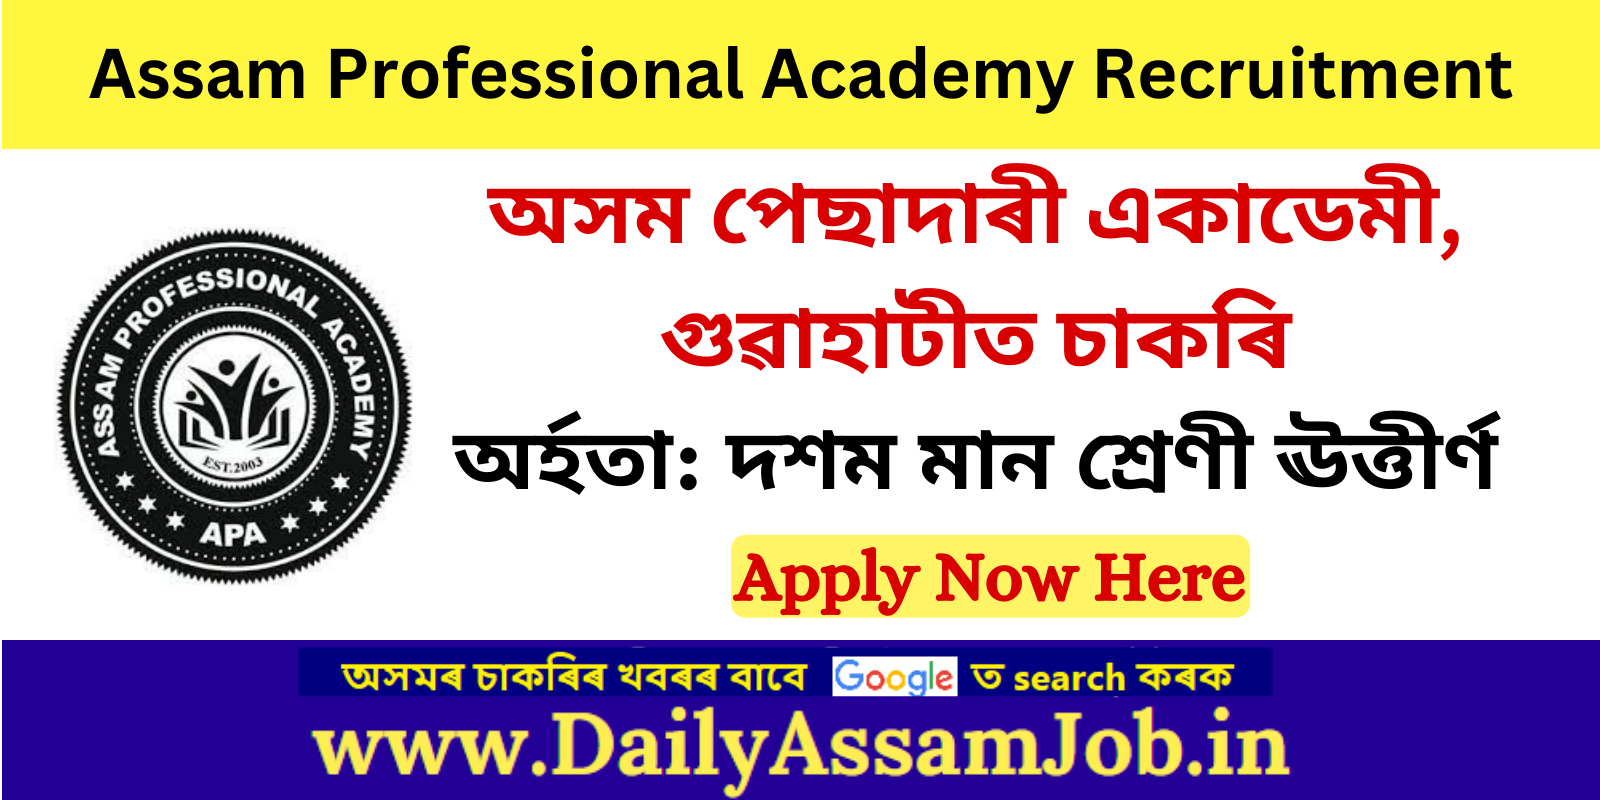 Assam Career :: Assam Professional Academy Recruitment for 14 Assistant, Peon & Other Vacancy